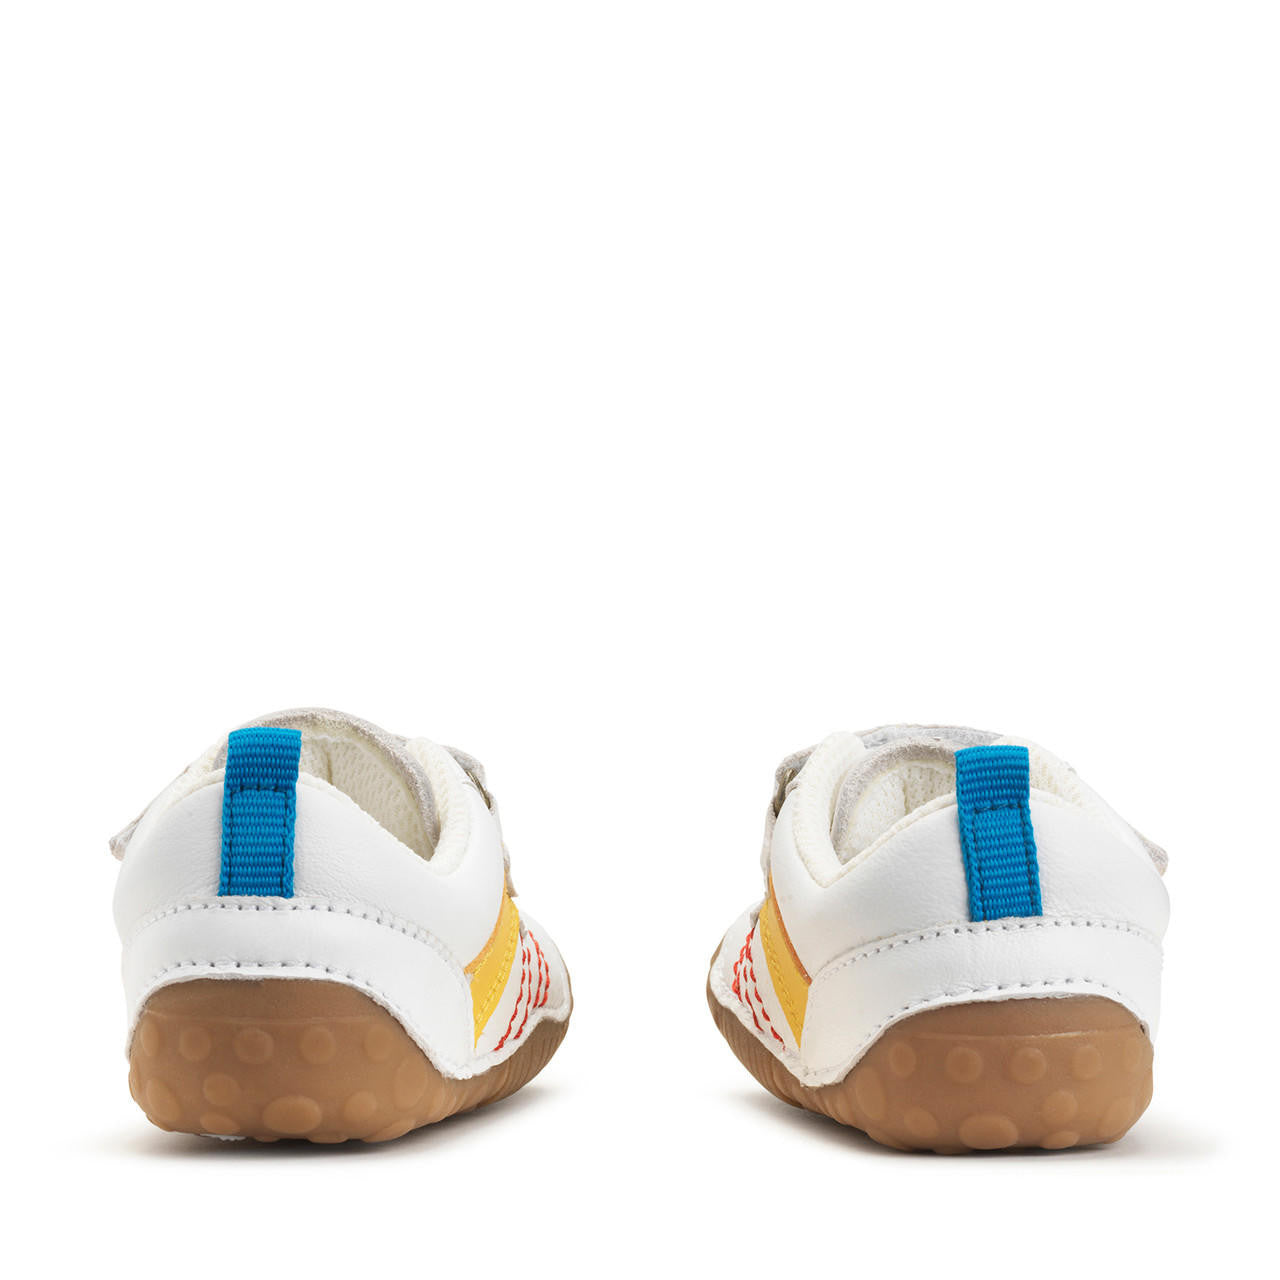 A boys pre-walker by Start-Rite, style Little Smile, in white multi leather and double velcro fastening. Back view.